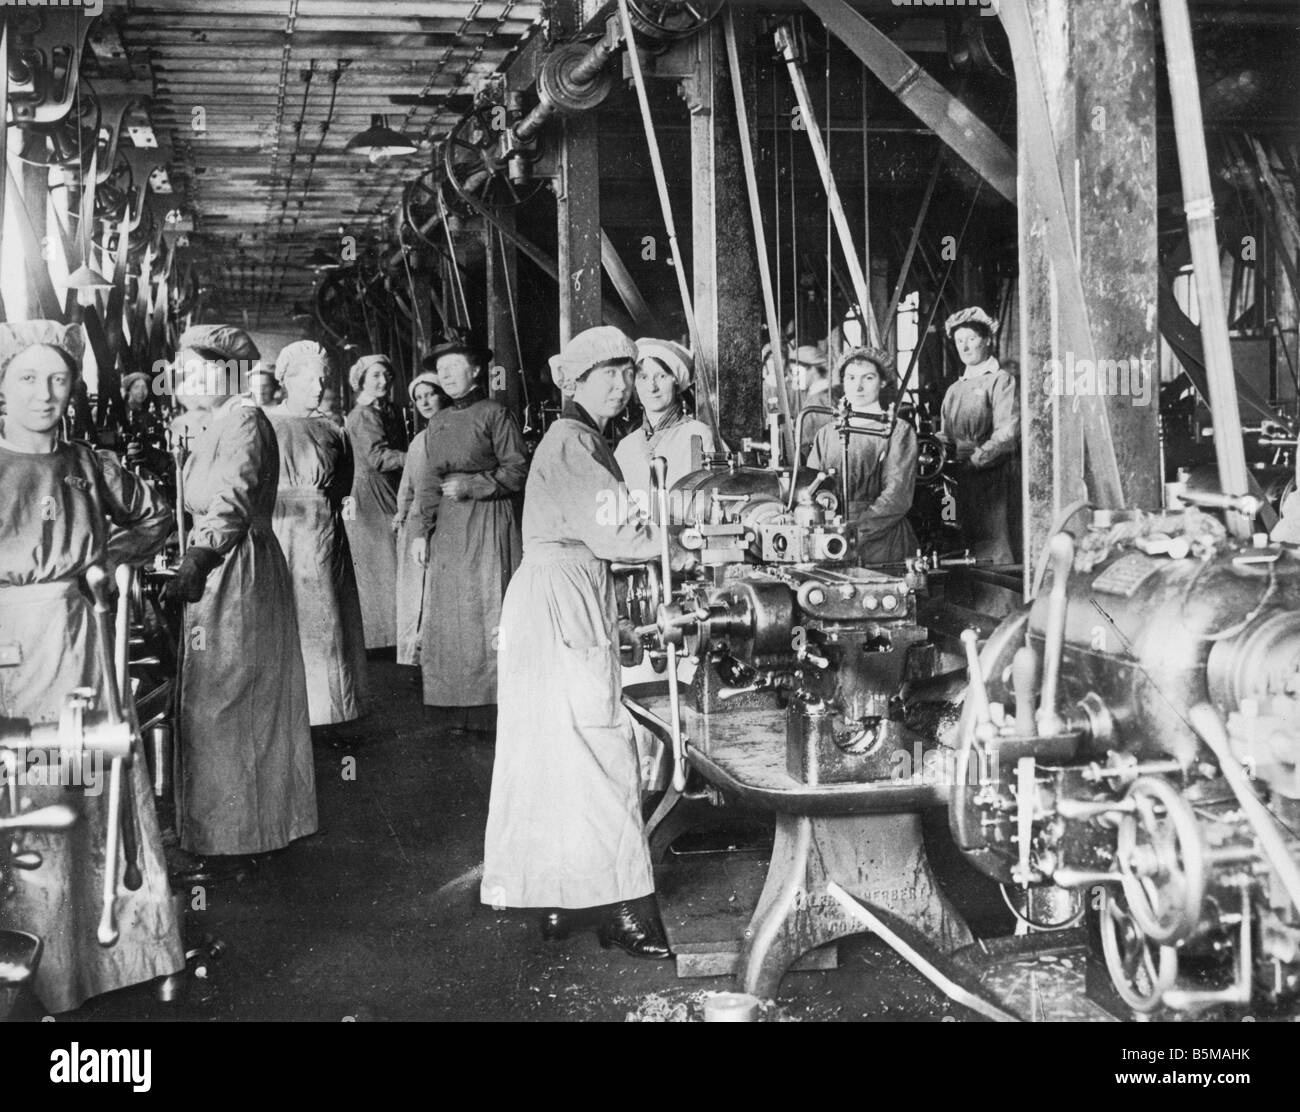 2 G55 W2 1916 2 Women in Ammunition factory Scot 1916 History World War 1 War economy Society ladies as temporary workers in an Stock Photo